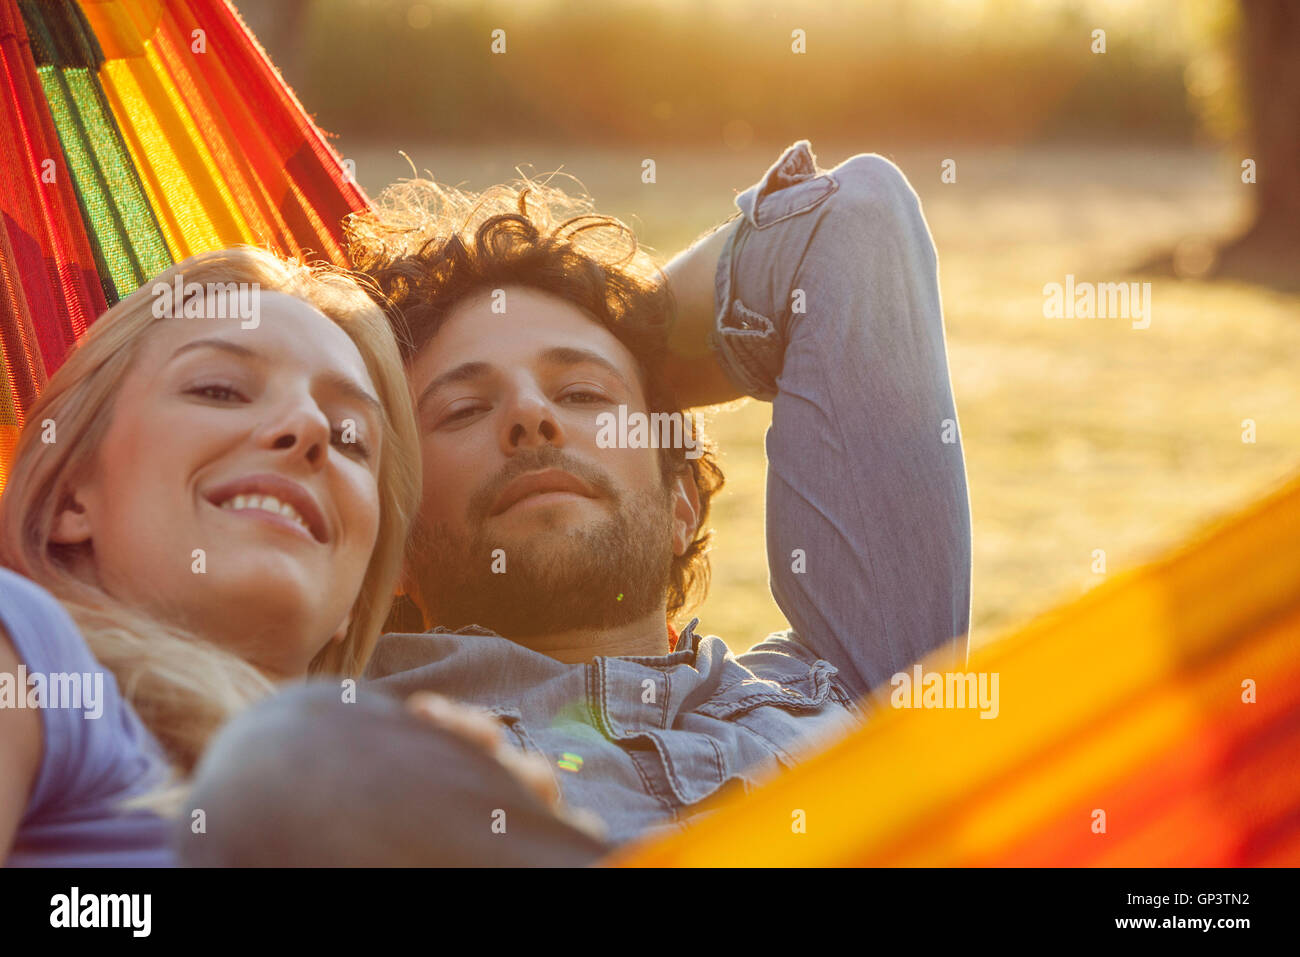 Couple relaxing together in hammock, portrait Stock Photo